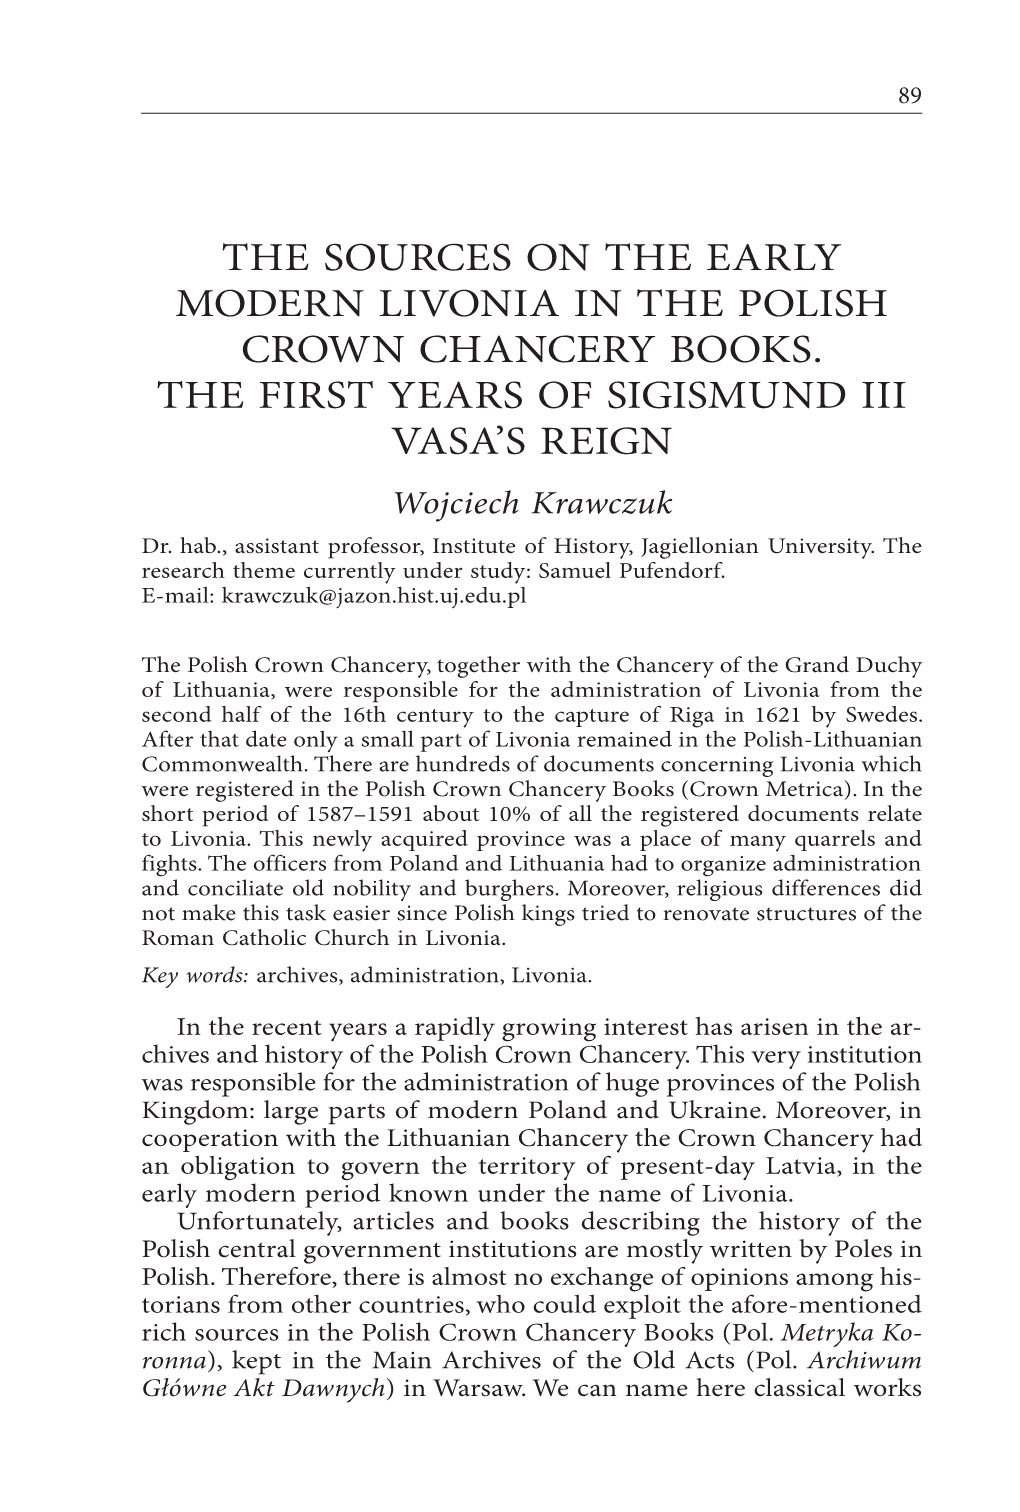 The Sources on the Early Modern Livonia in the Polish Crown Chancery Books